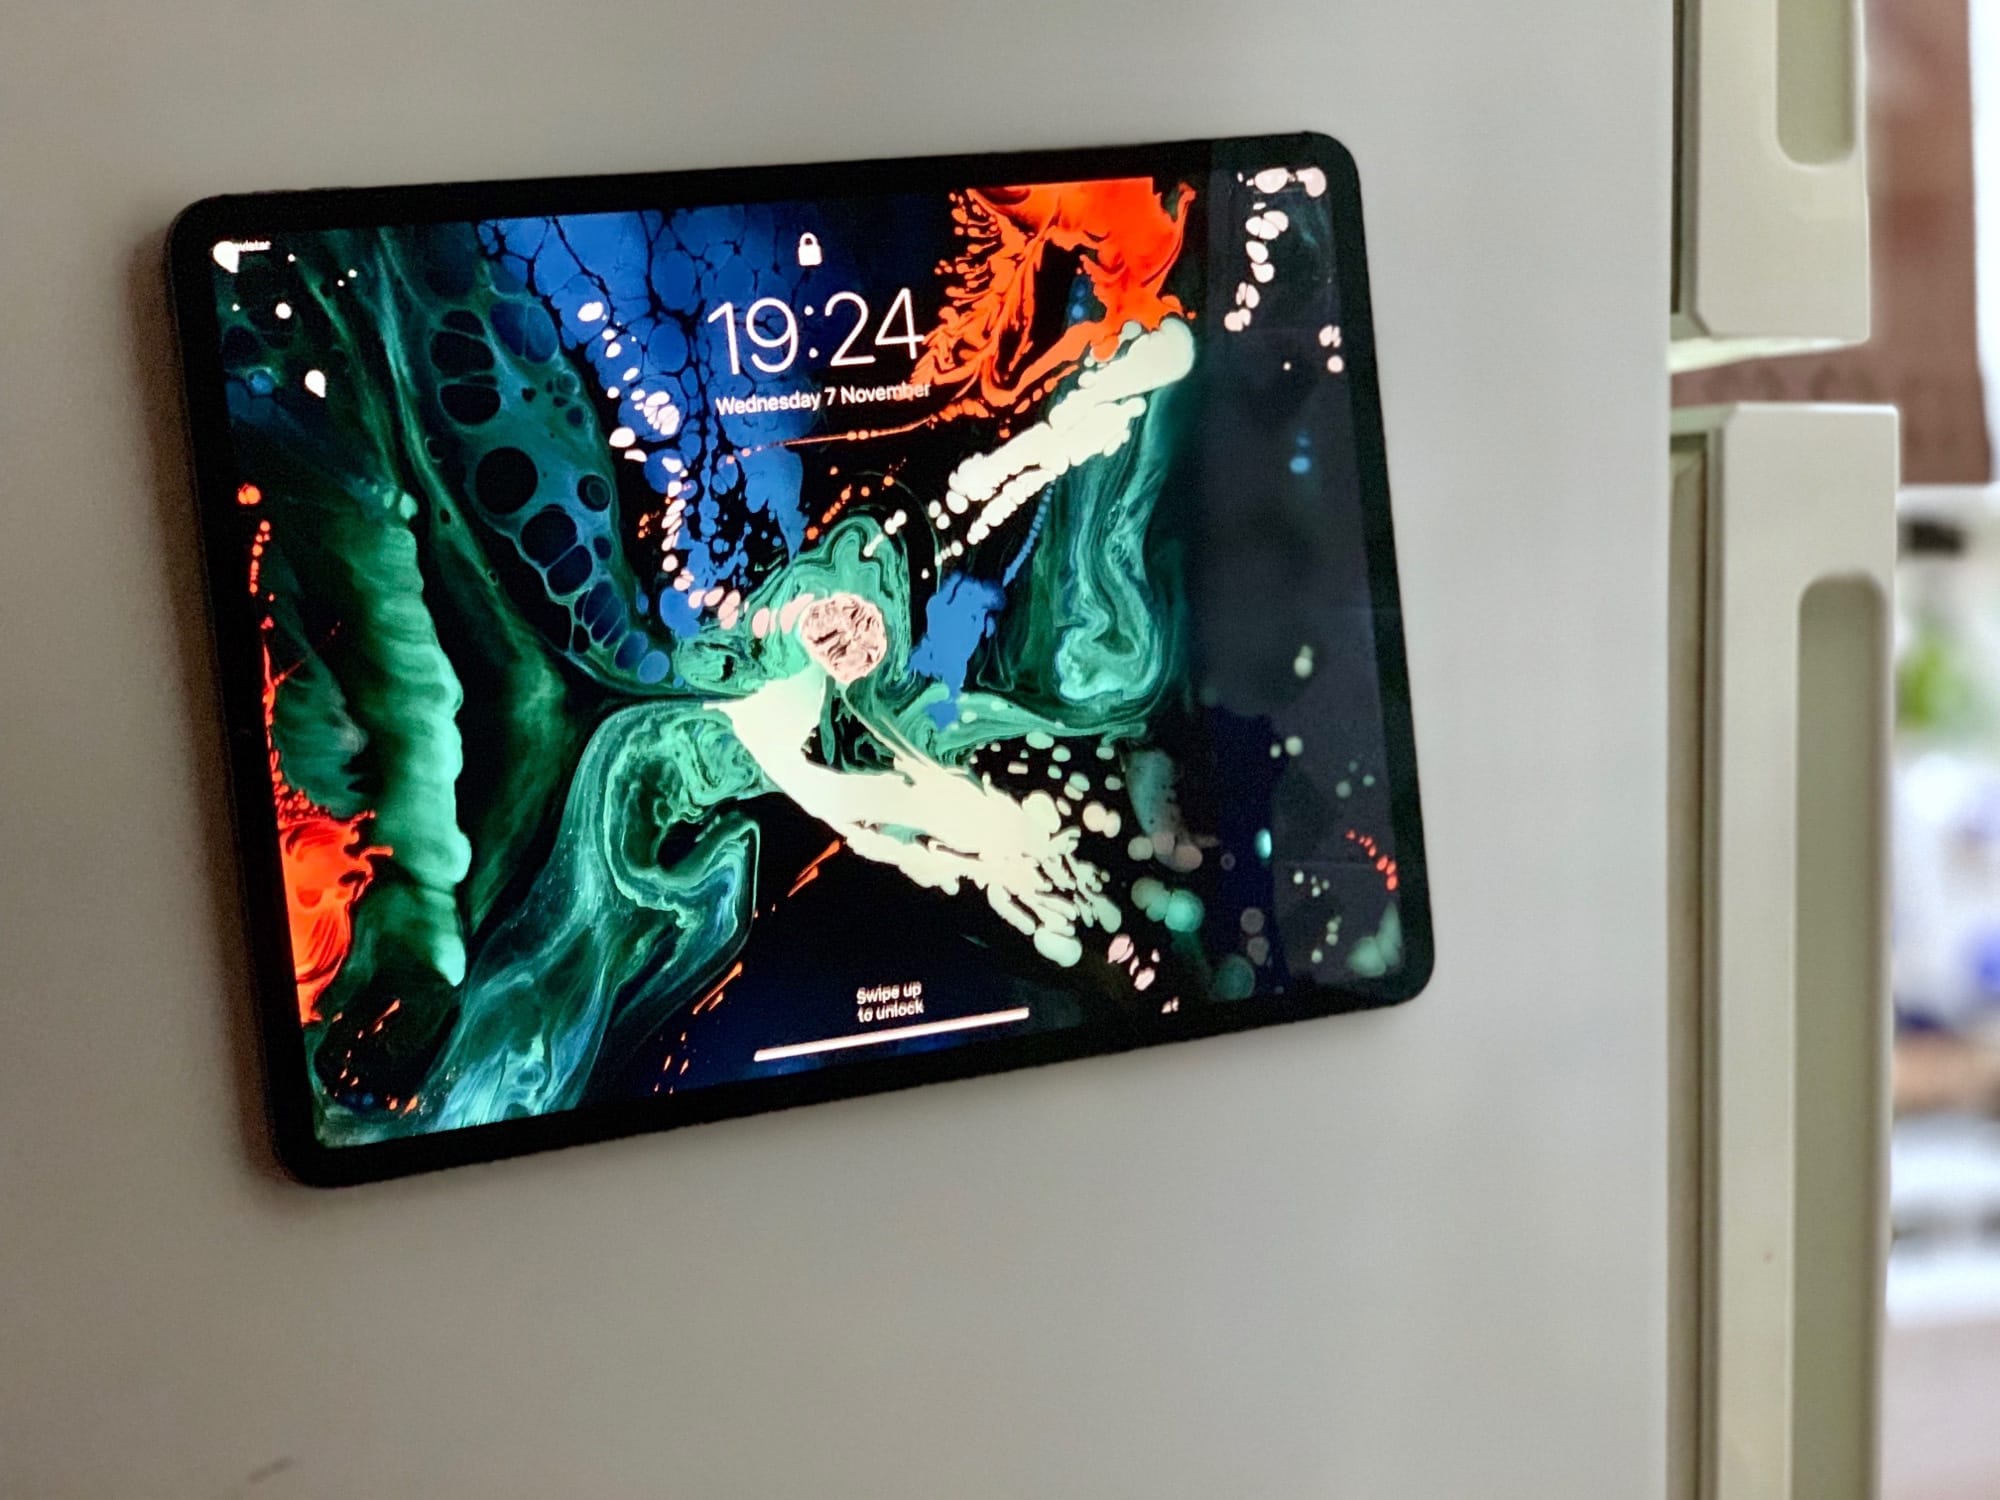 You can attach iPad Pro to a refrigerator thanks to magnets. But don't try this at home.